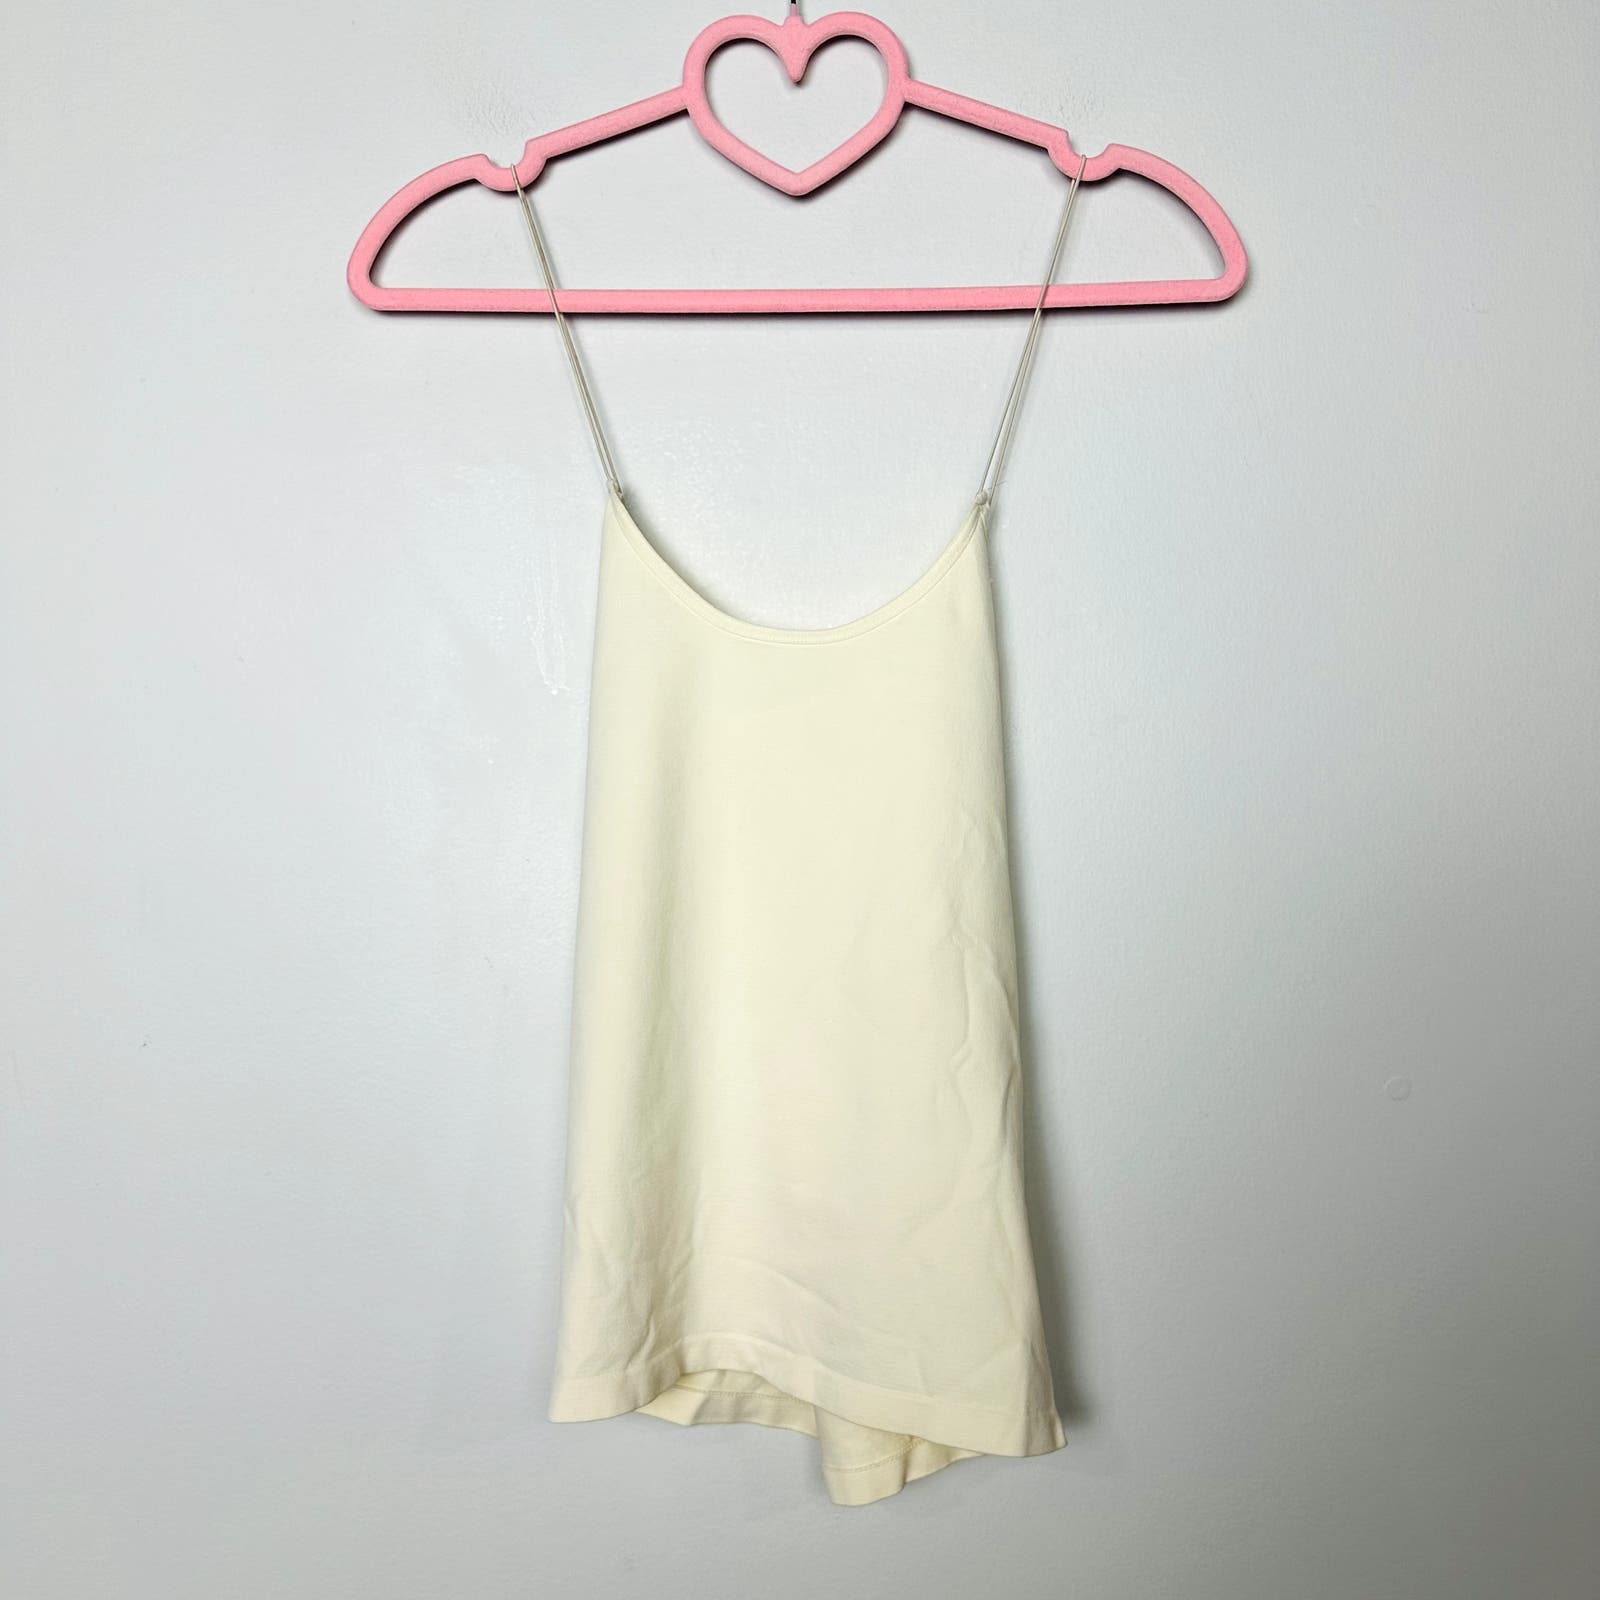 Free People Intimately NWOT Cream Scoop Neck Cami Top Size M/L